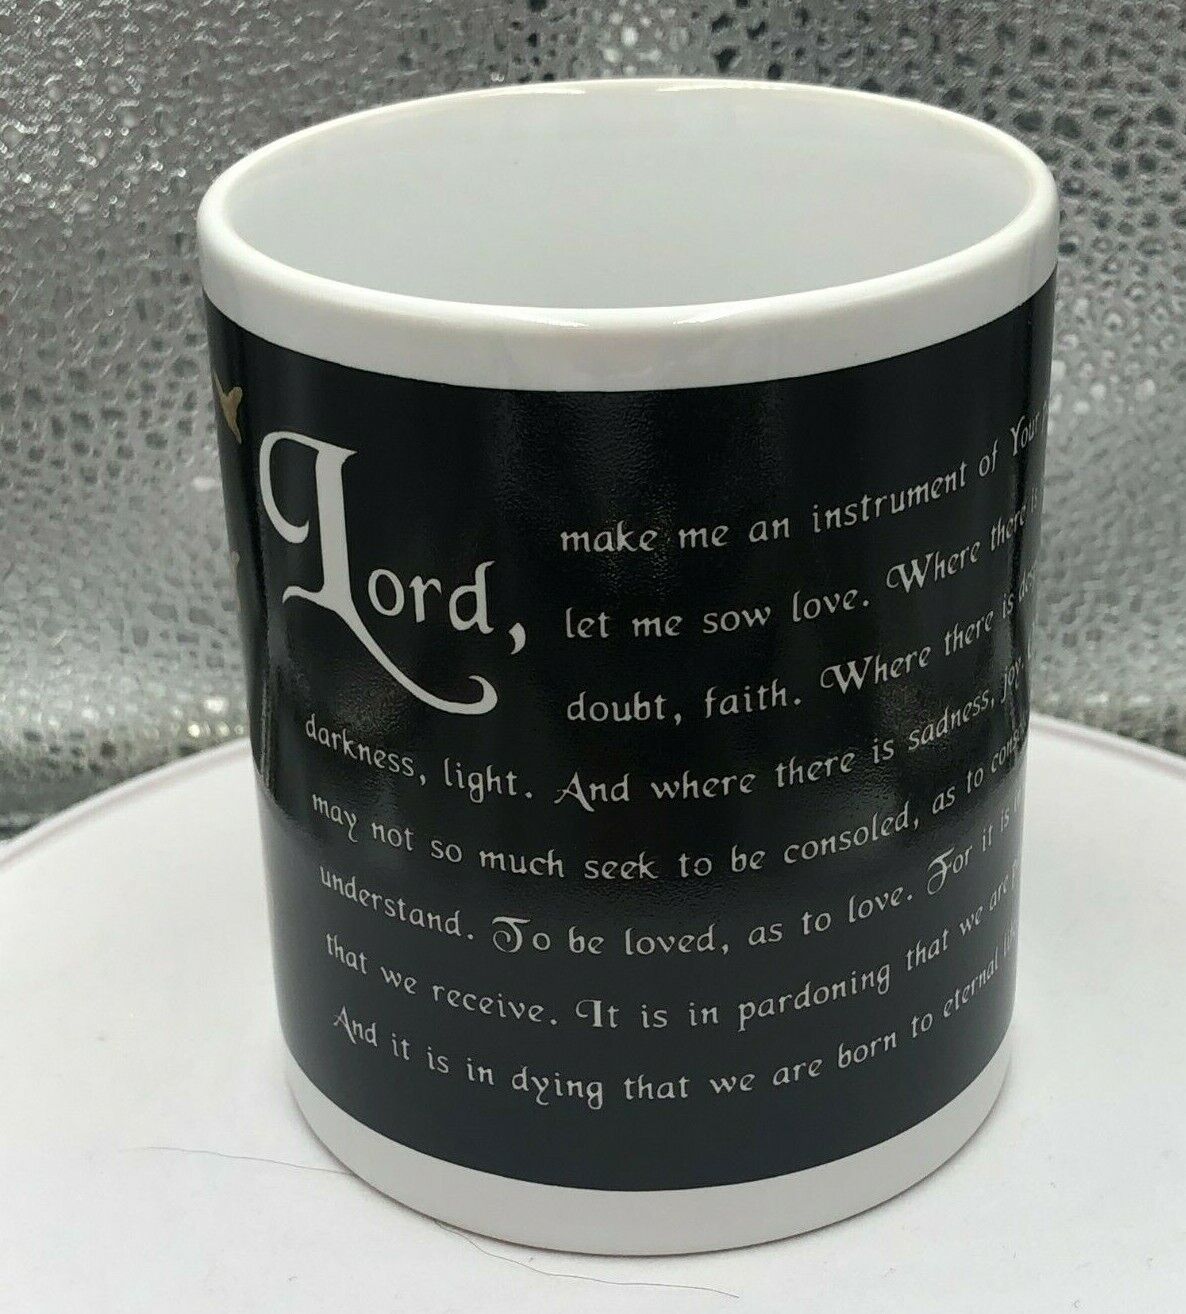 Saint Francis of Assisi Prayer Cup, New